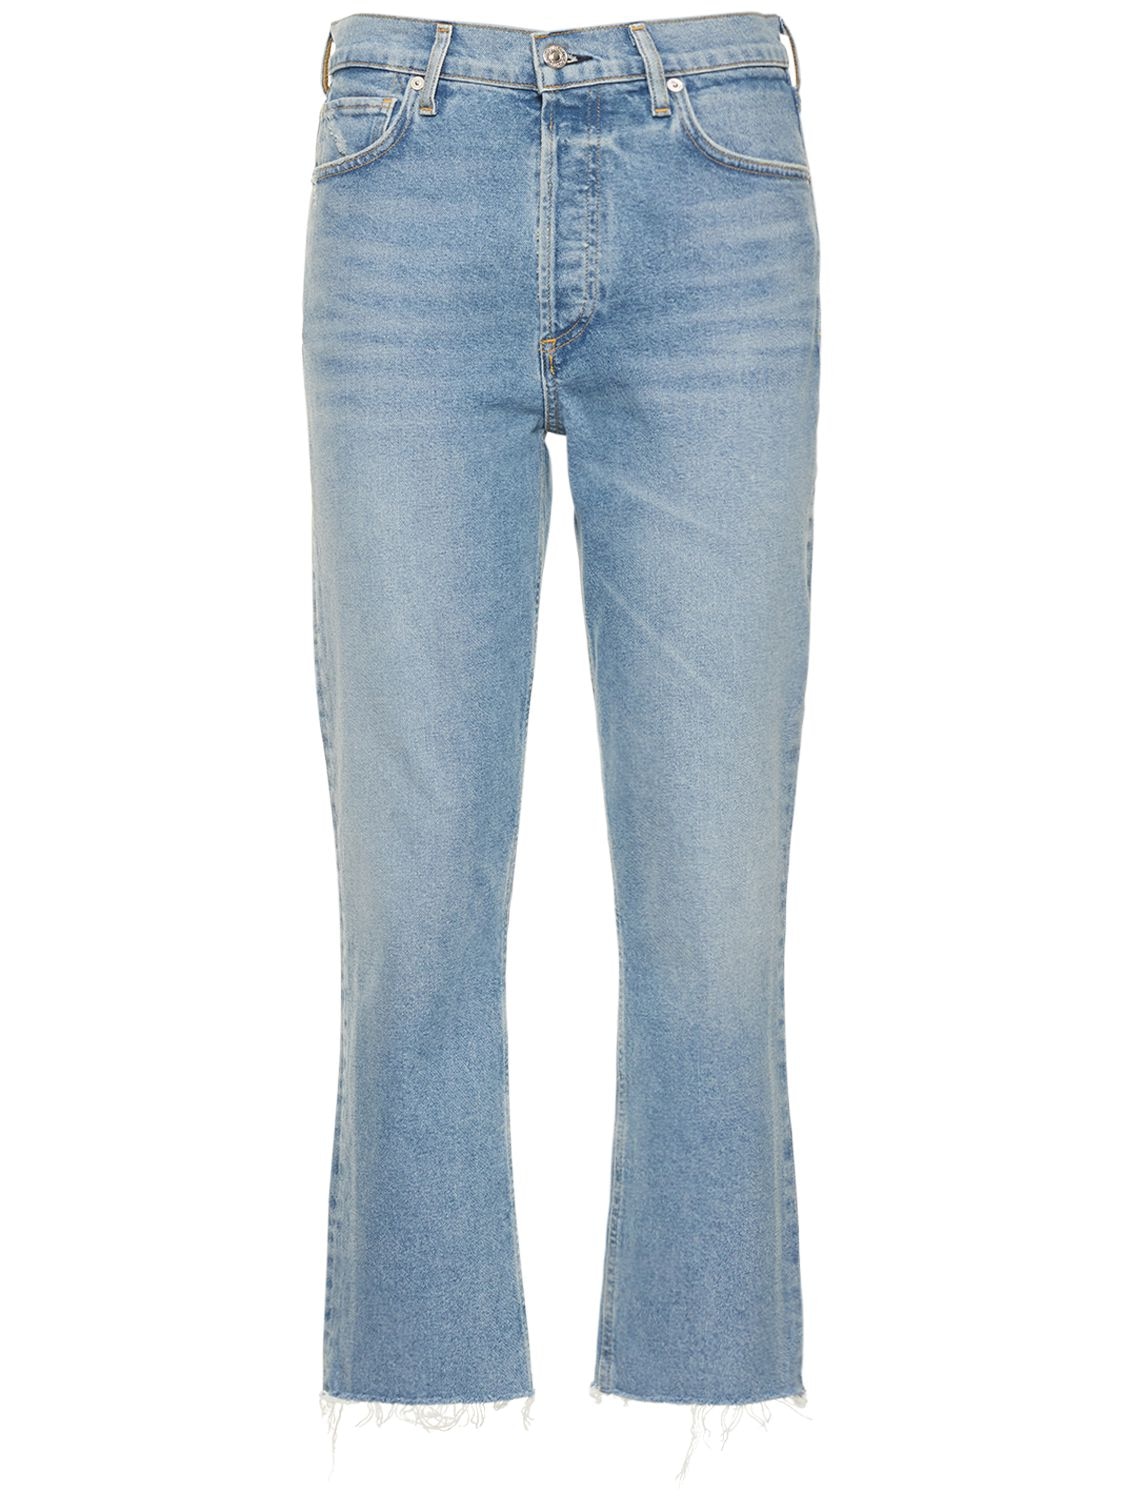 Charlotte Crop High Rise Straight Jeans - CITIZENS OF HUMANITY - Modalova